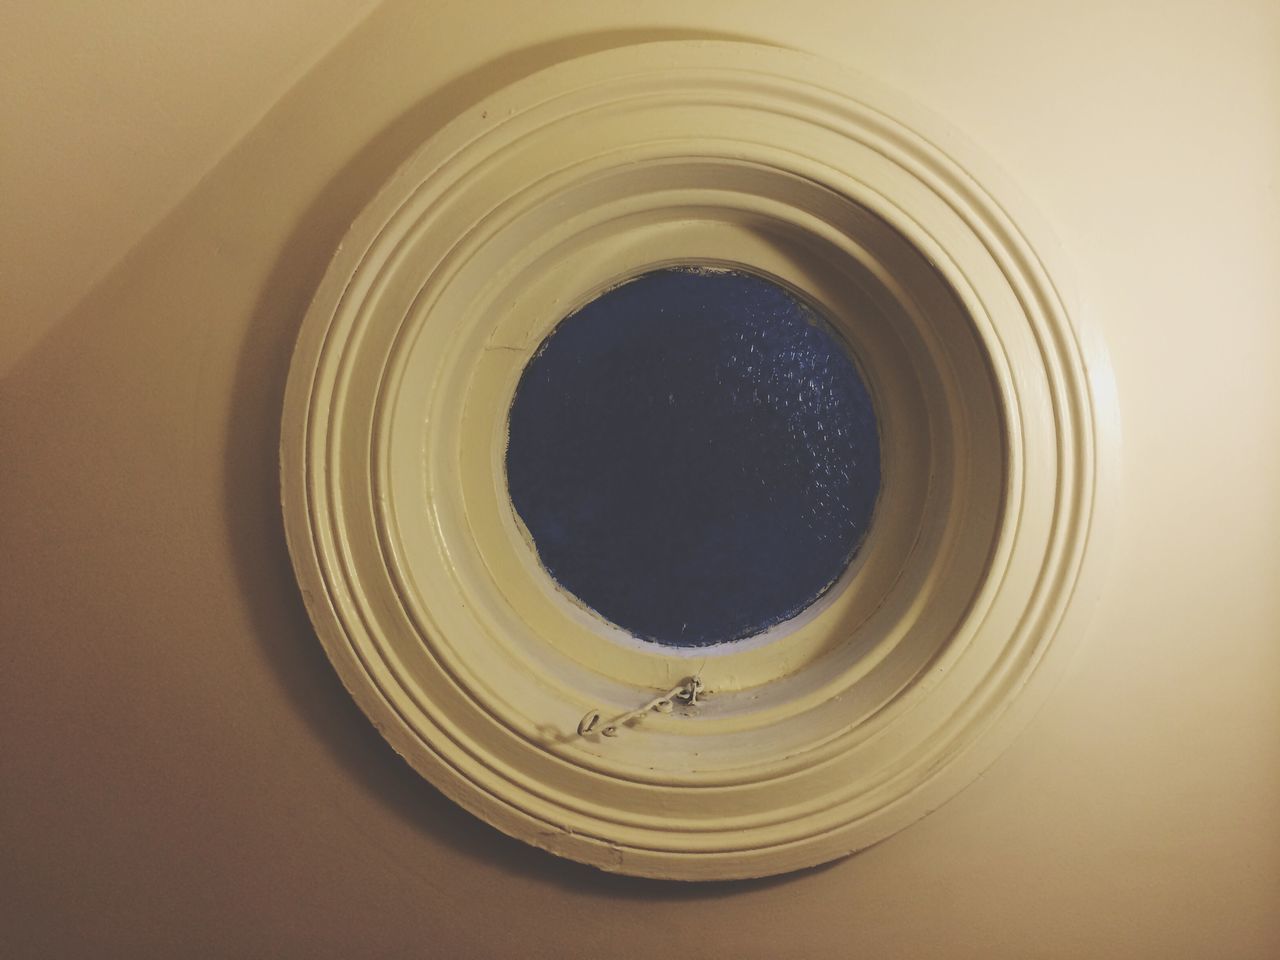 indoors, circle, close-up, geometric shape, no people, glass - material, reflection, directly above, lighting equipment, shape, transparent, high angle view, low angle view, window, copy space, mirror, glass, hole, directly below, still life